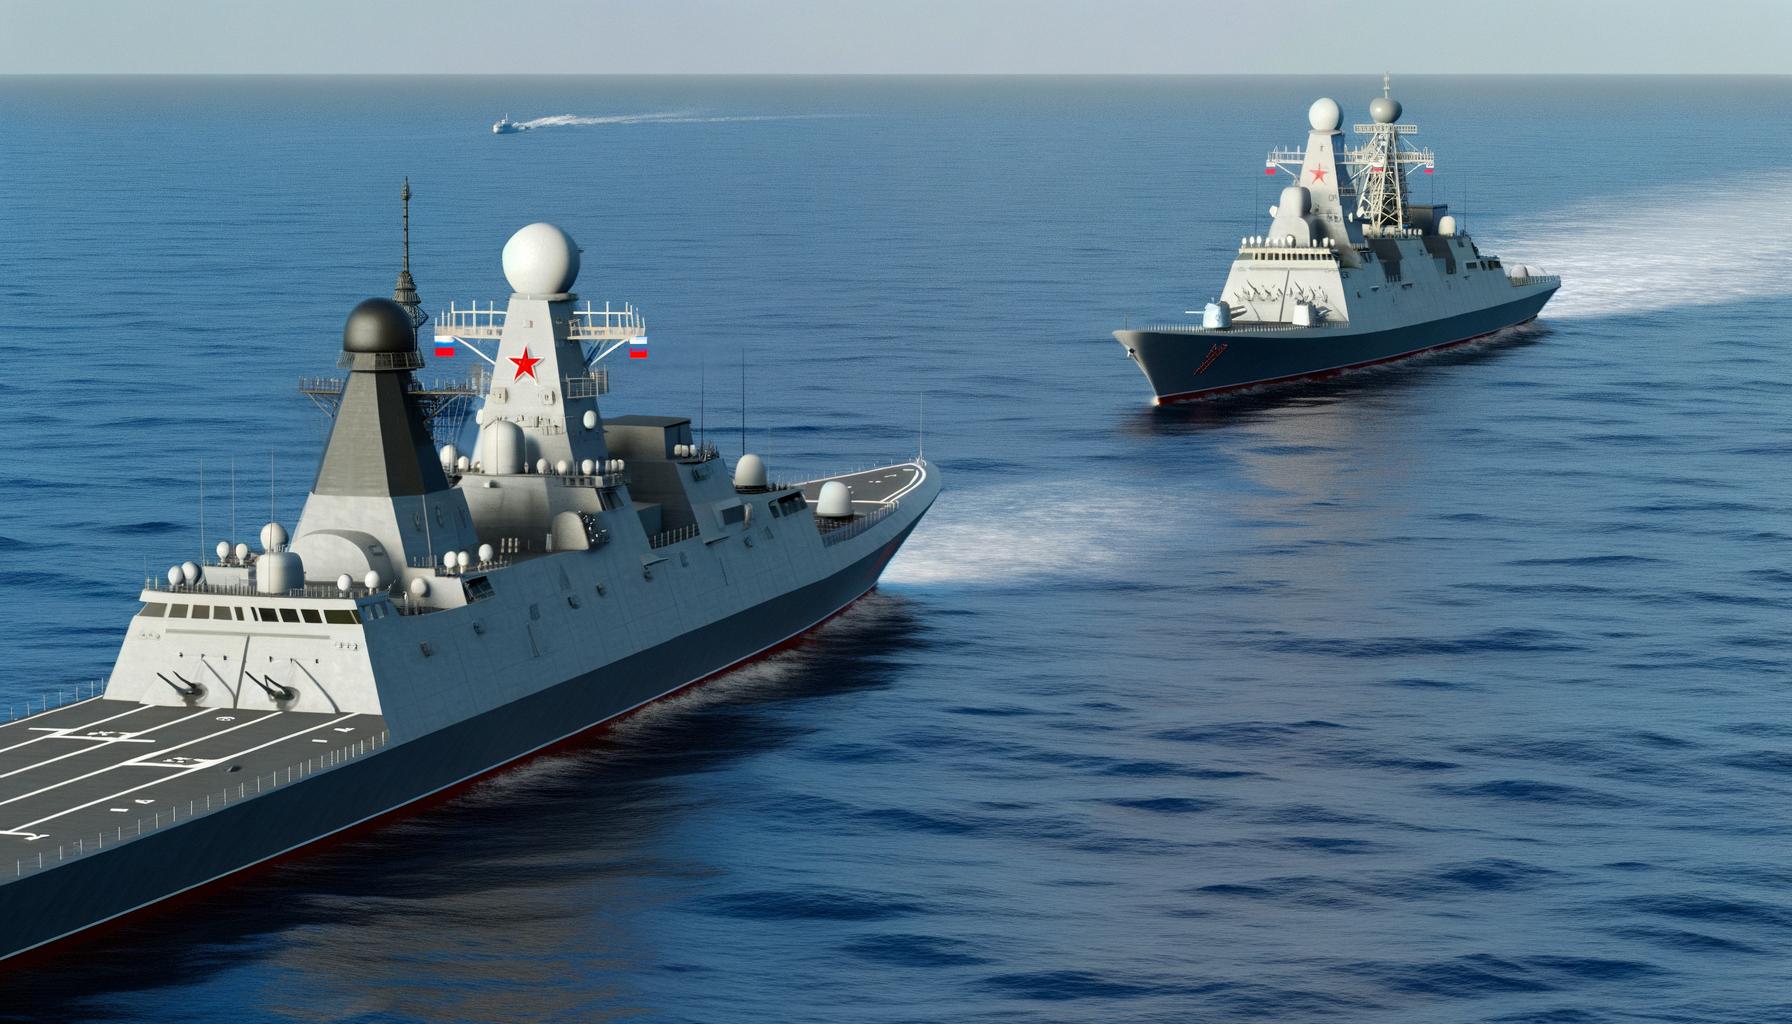 Russian and U.S. warships converge on Caribbean